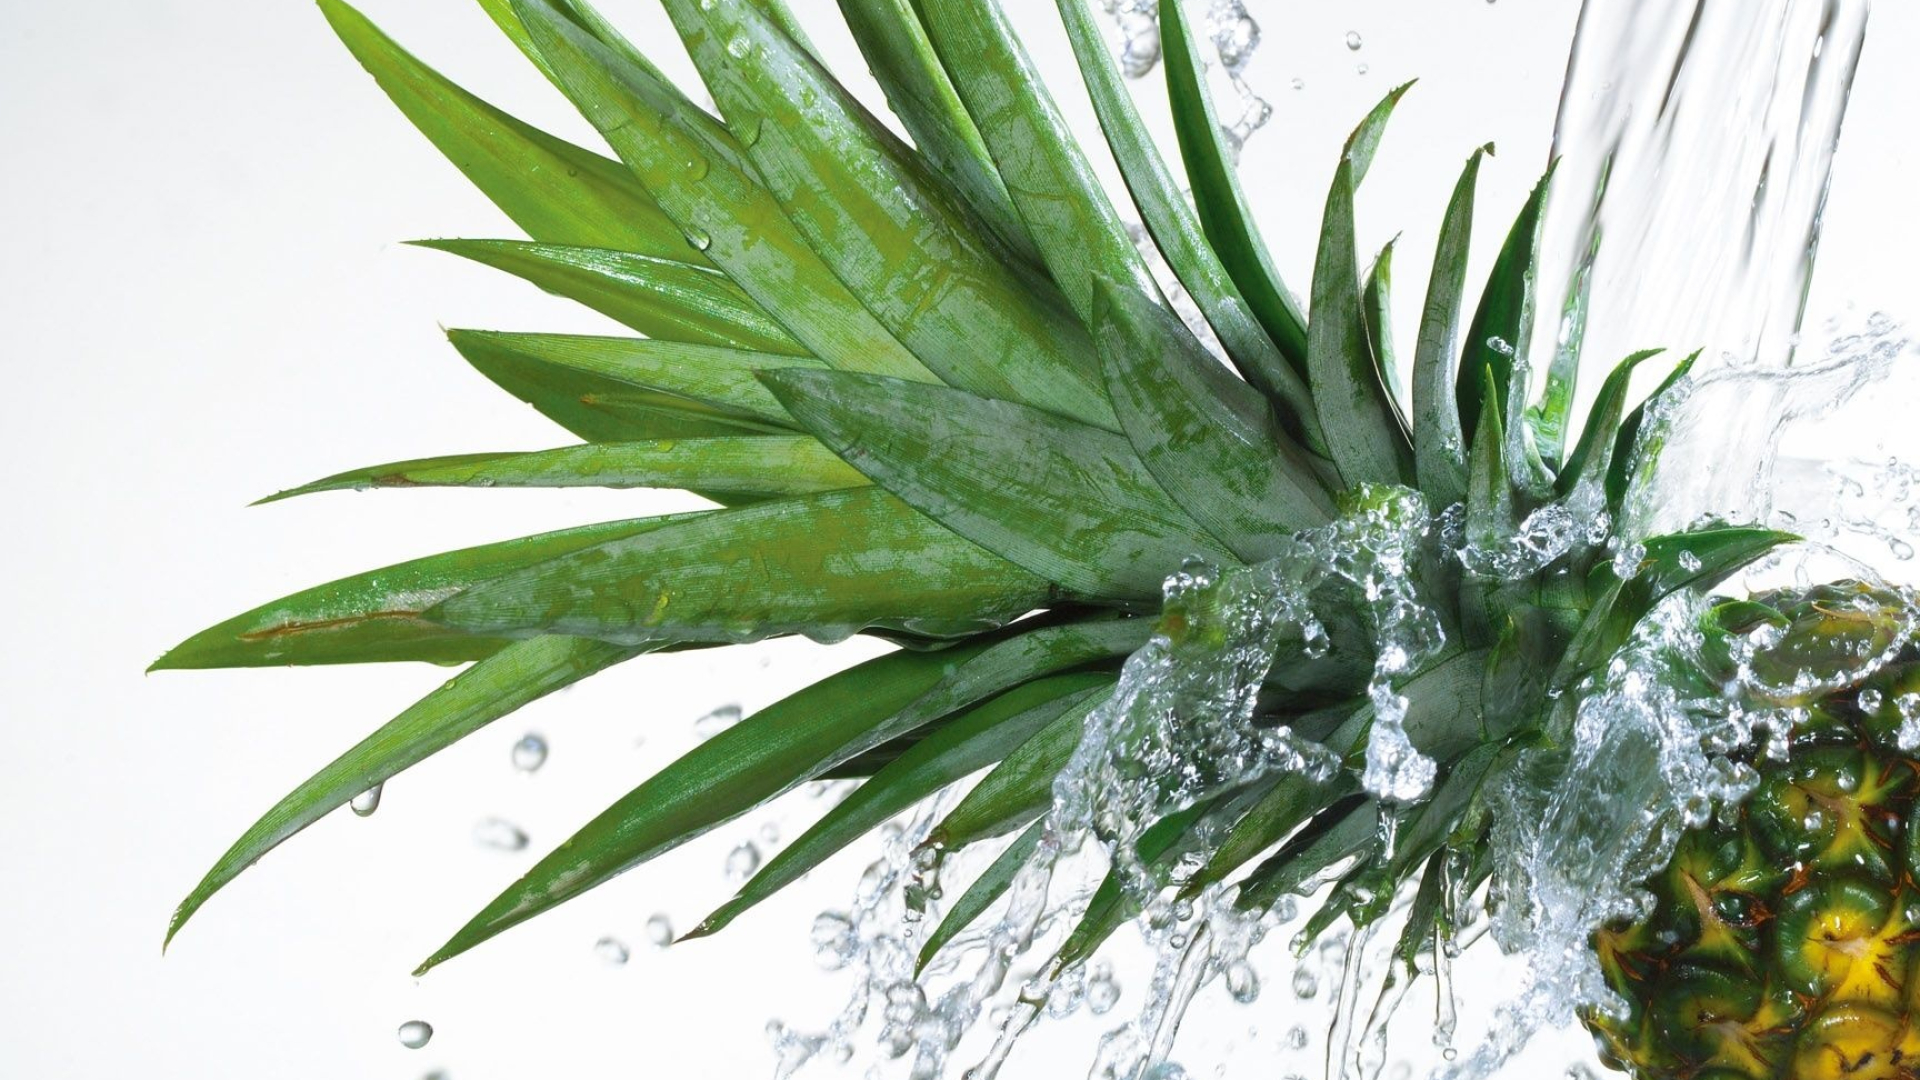 Pineapple: The most economically potential plant in the family Bromeliaceae. 1920x1080 Full HD Wallpaper.